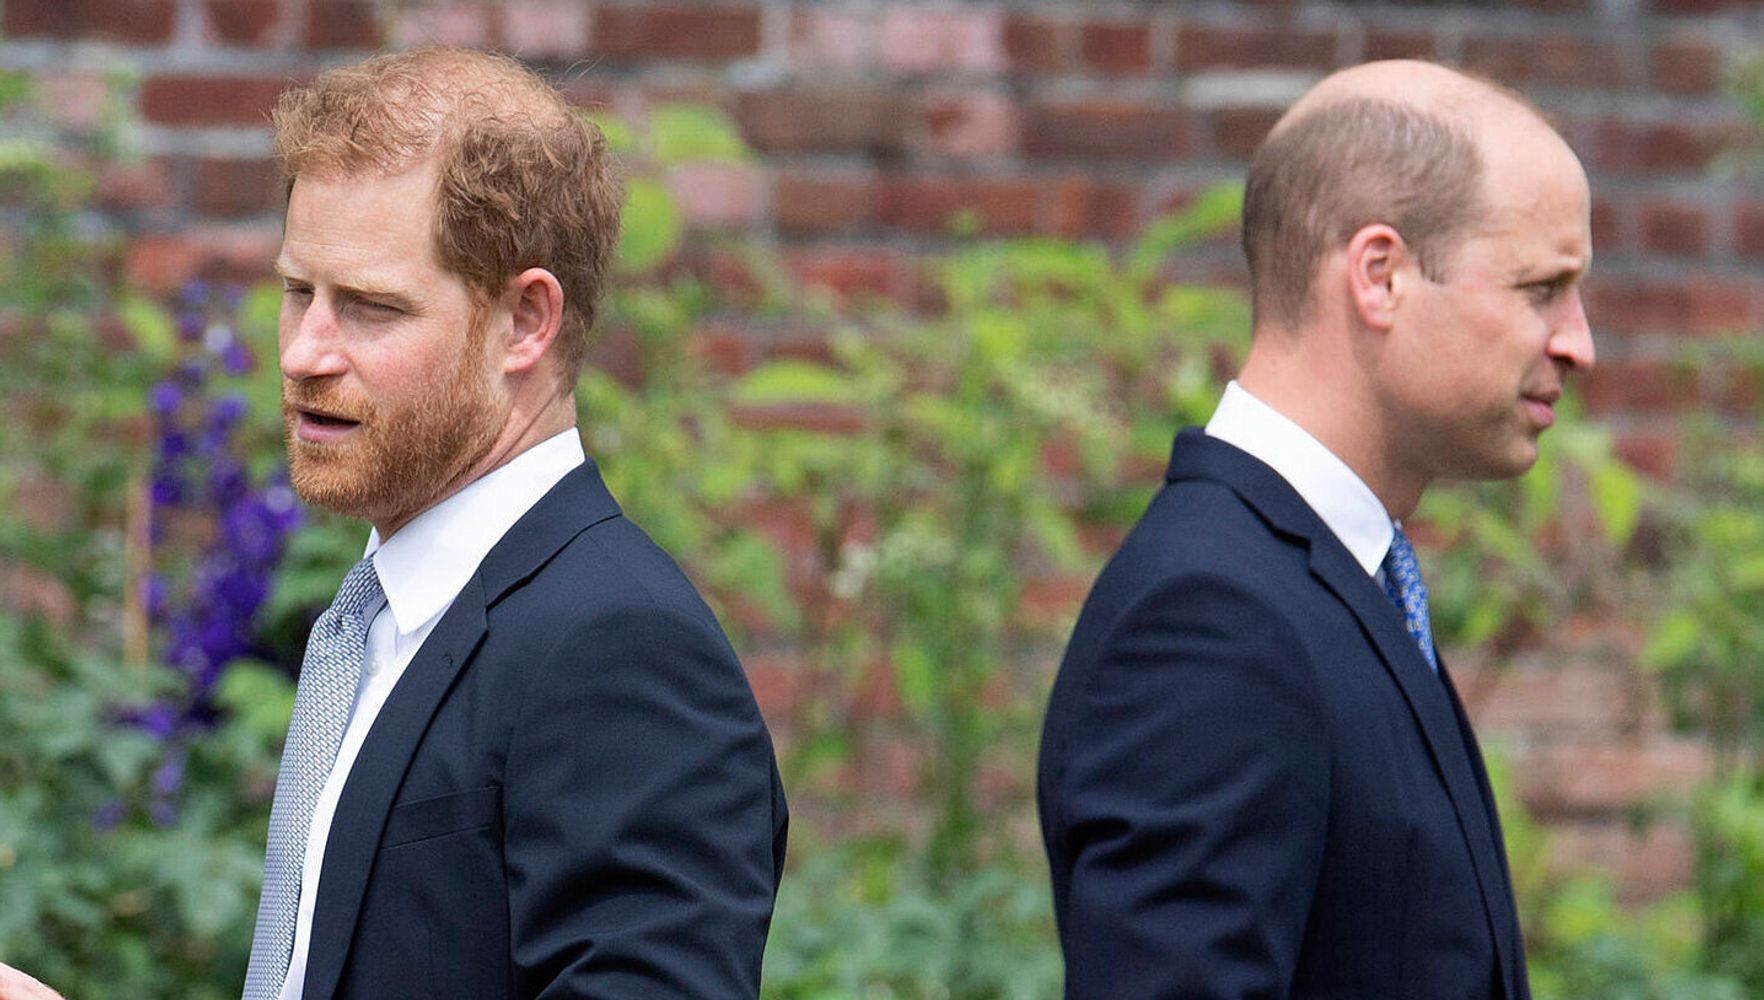 Kensington Palace Reportedly Wrested Change In TV Documentary On William And Harry